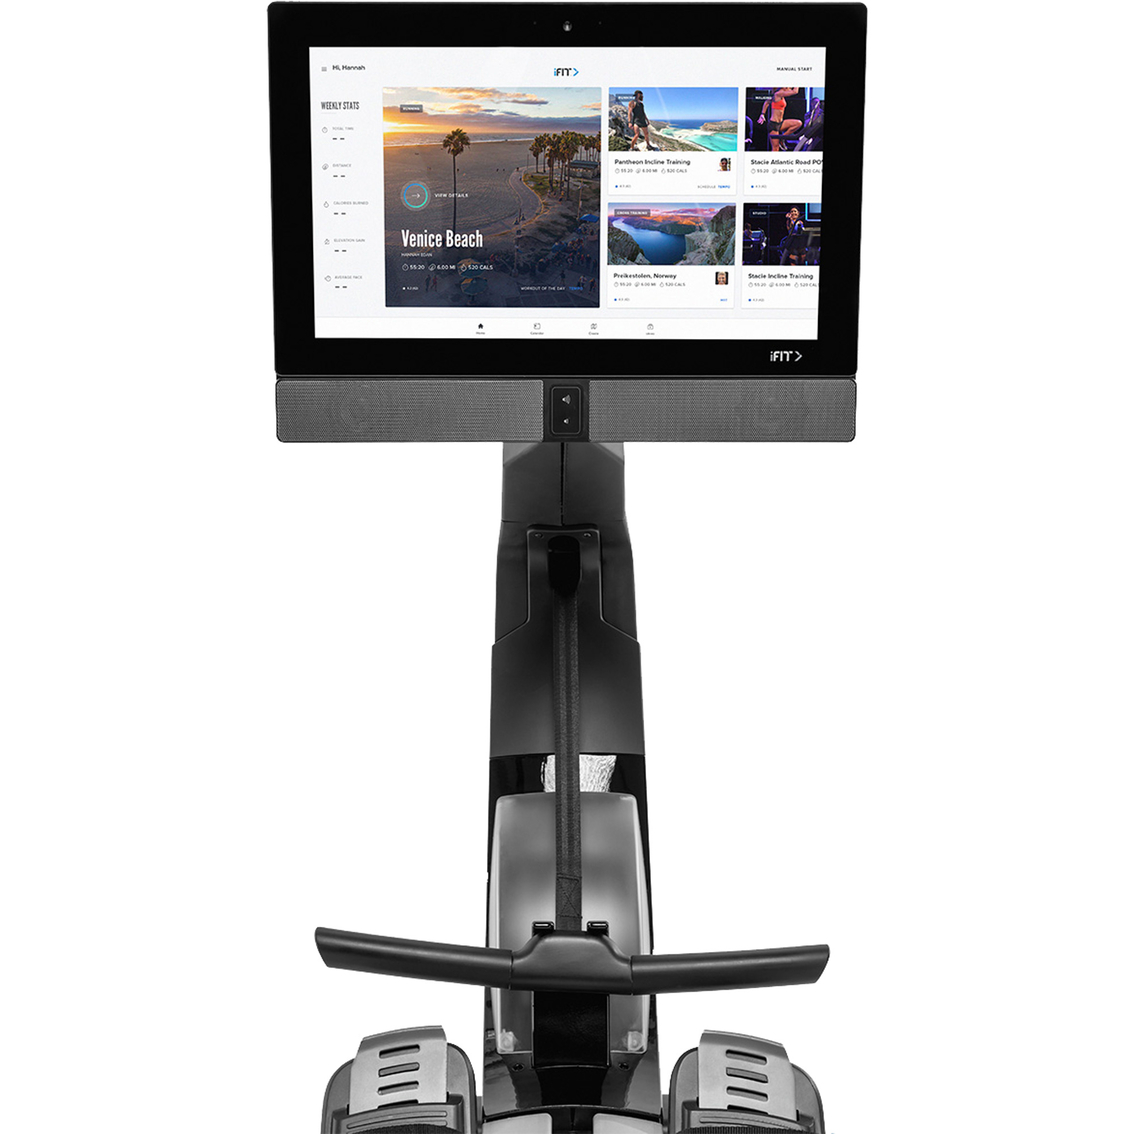 Nordictrack Rw900 Rower | Cardio Equipment | Sports & Outdoors | Shop ...